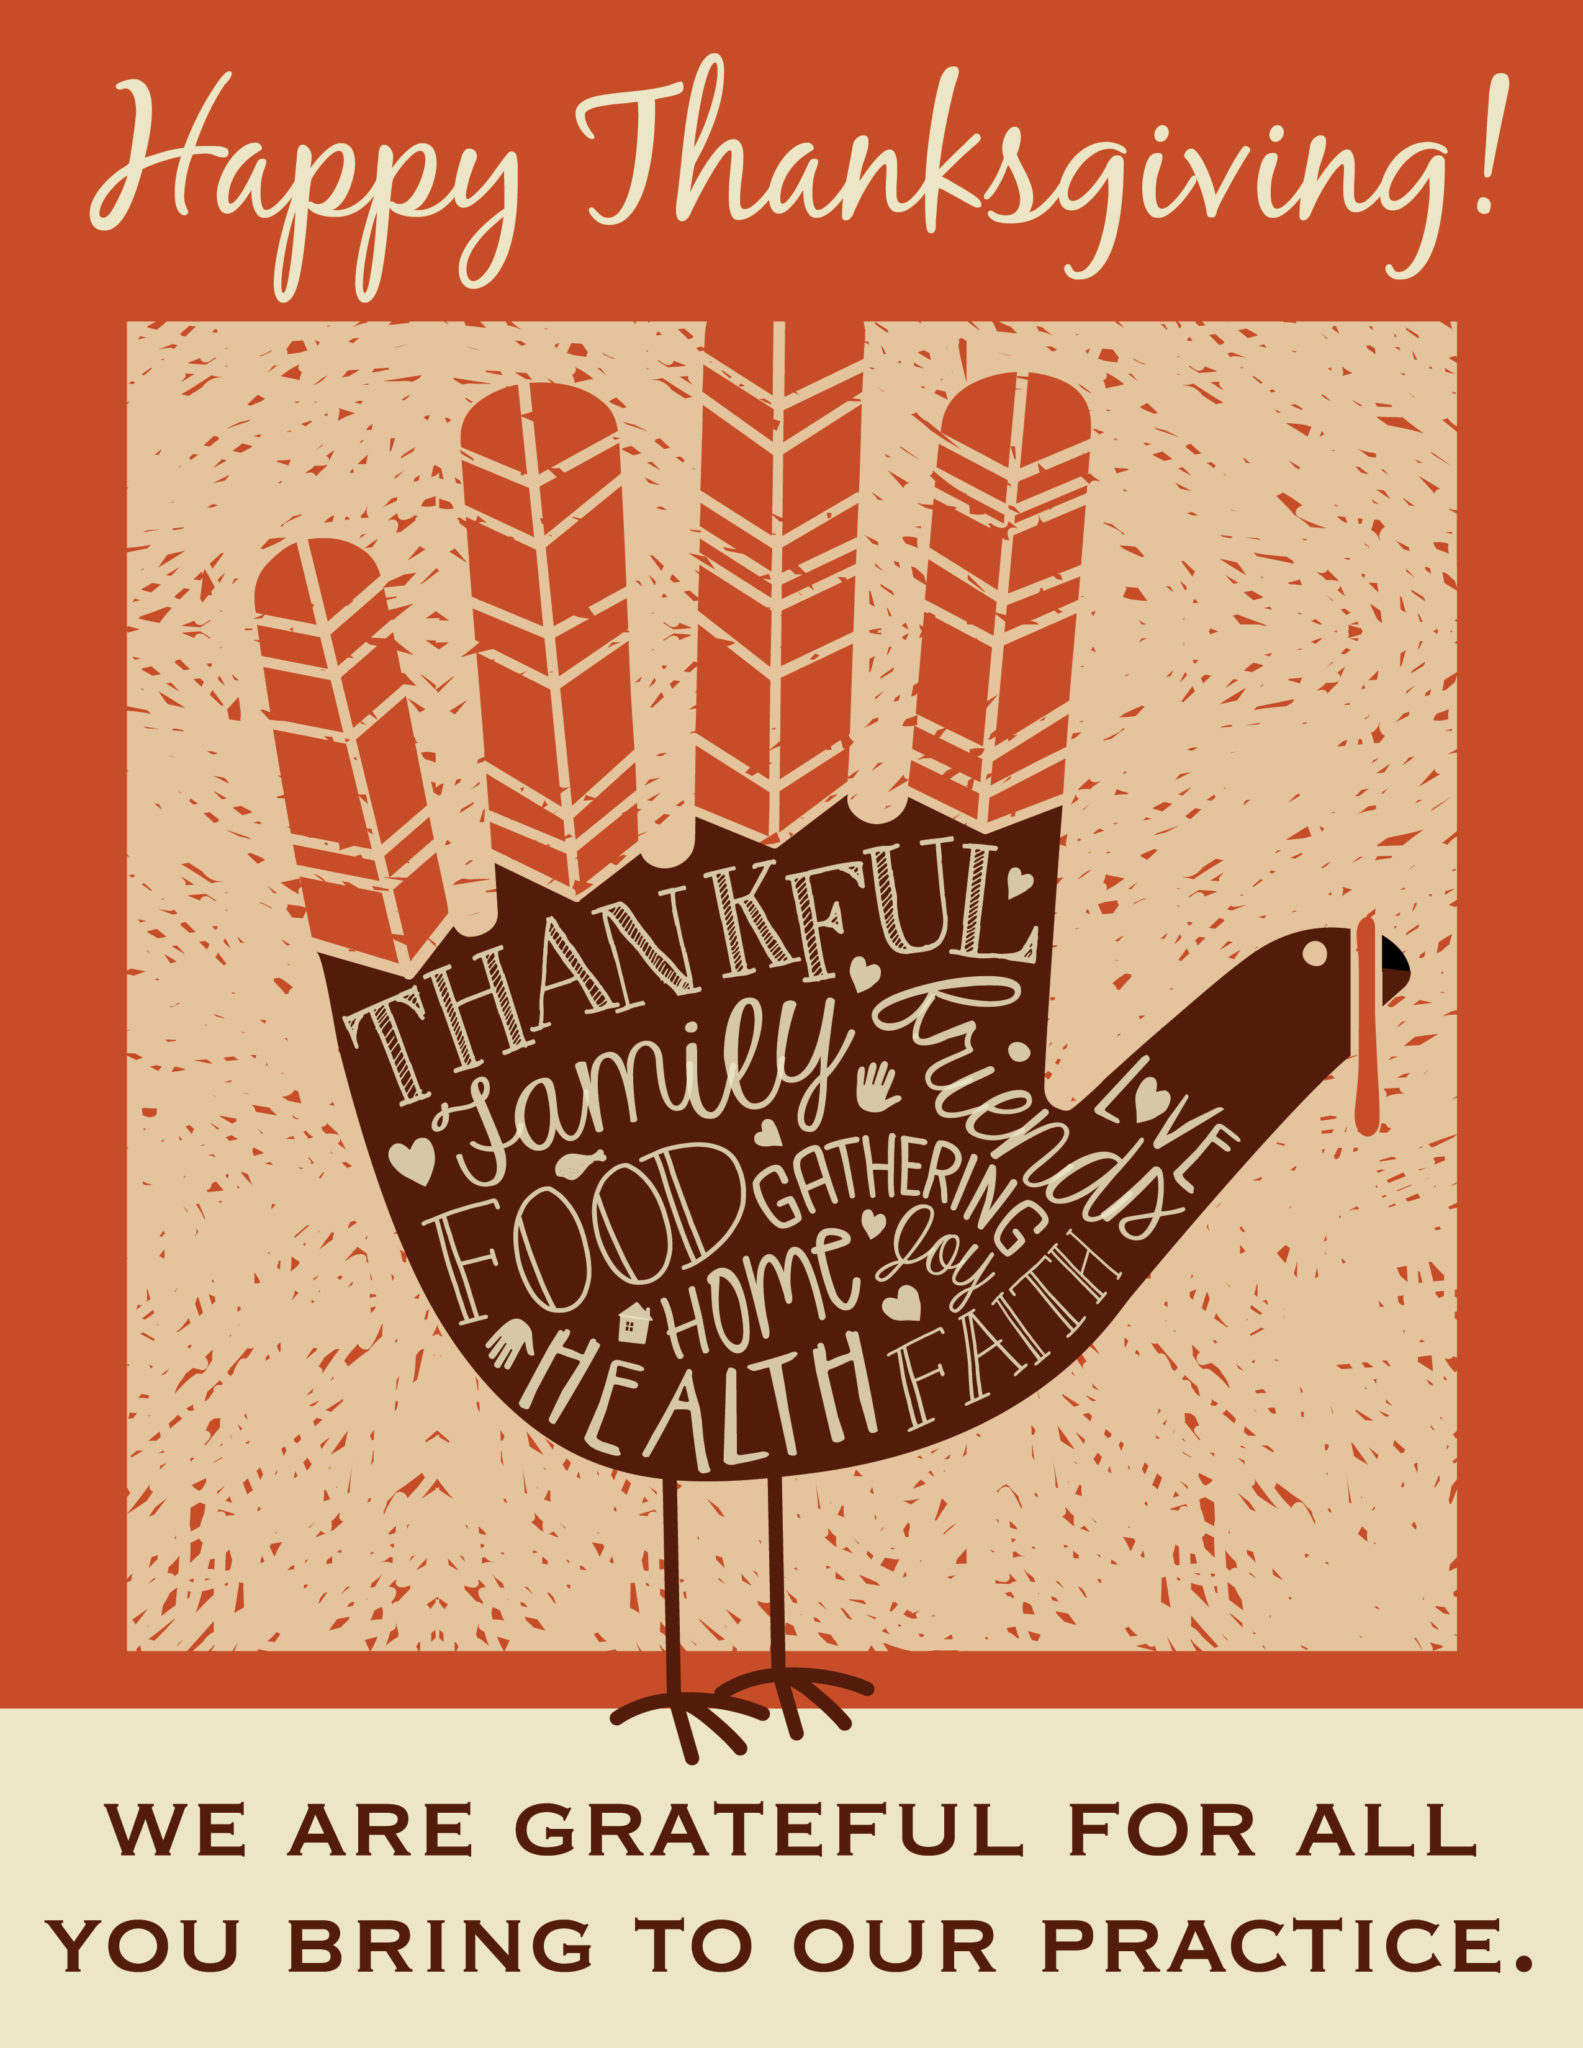 Thanksgiving Ideas for Your Dental Practice | Practice Cafe